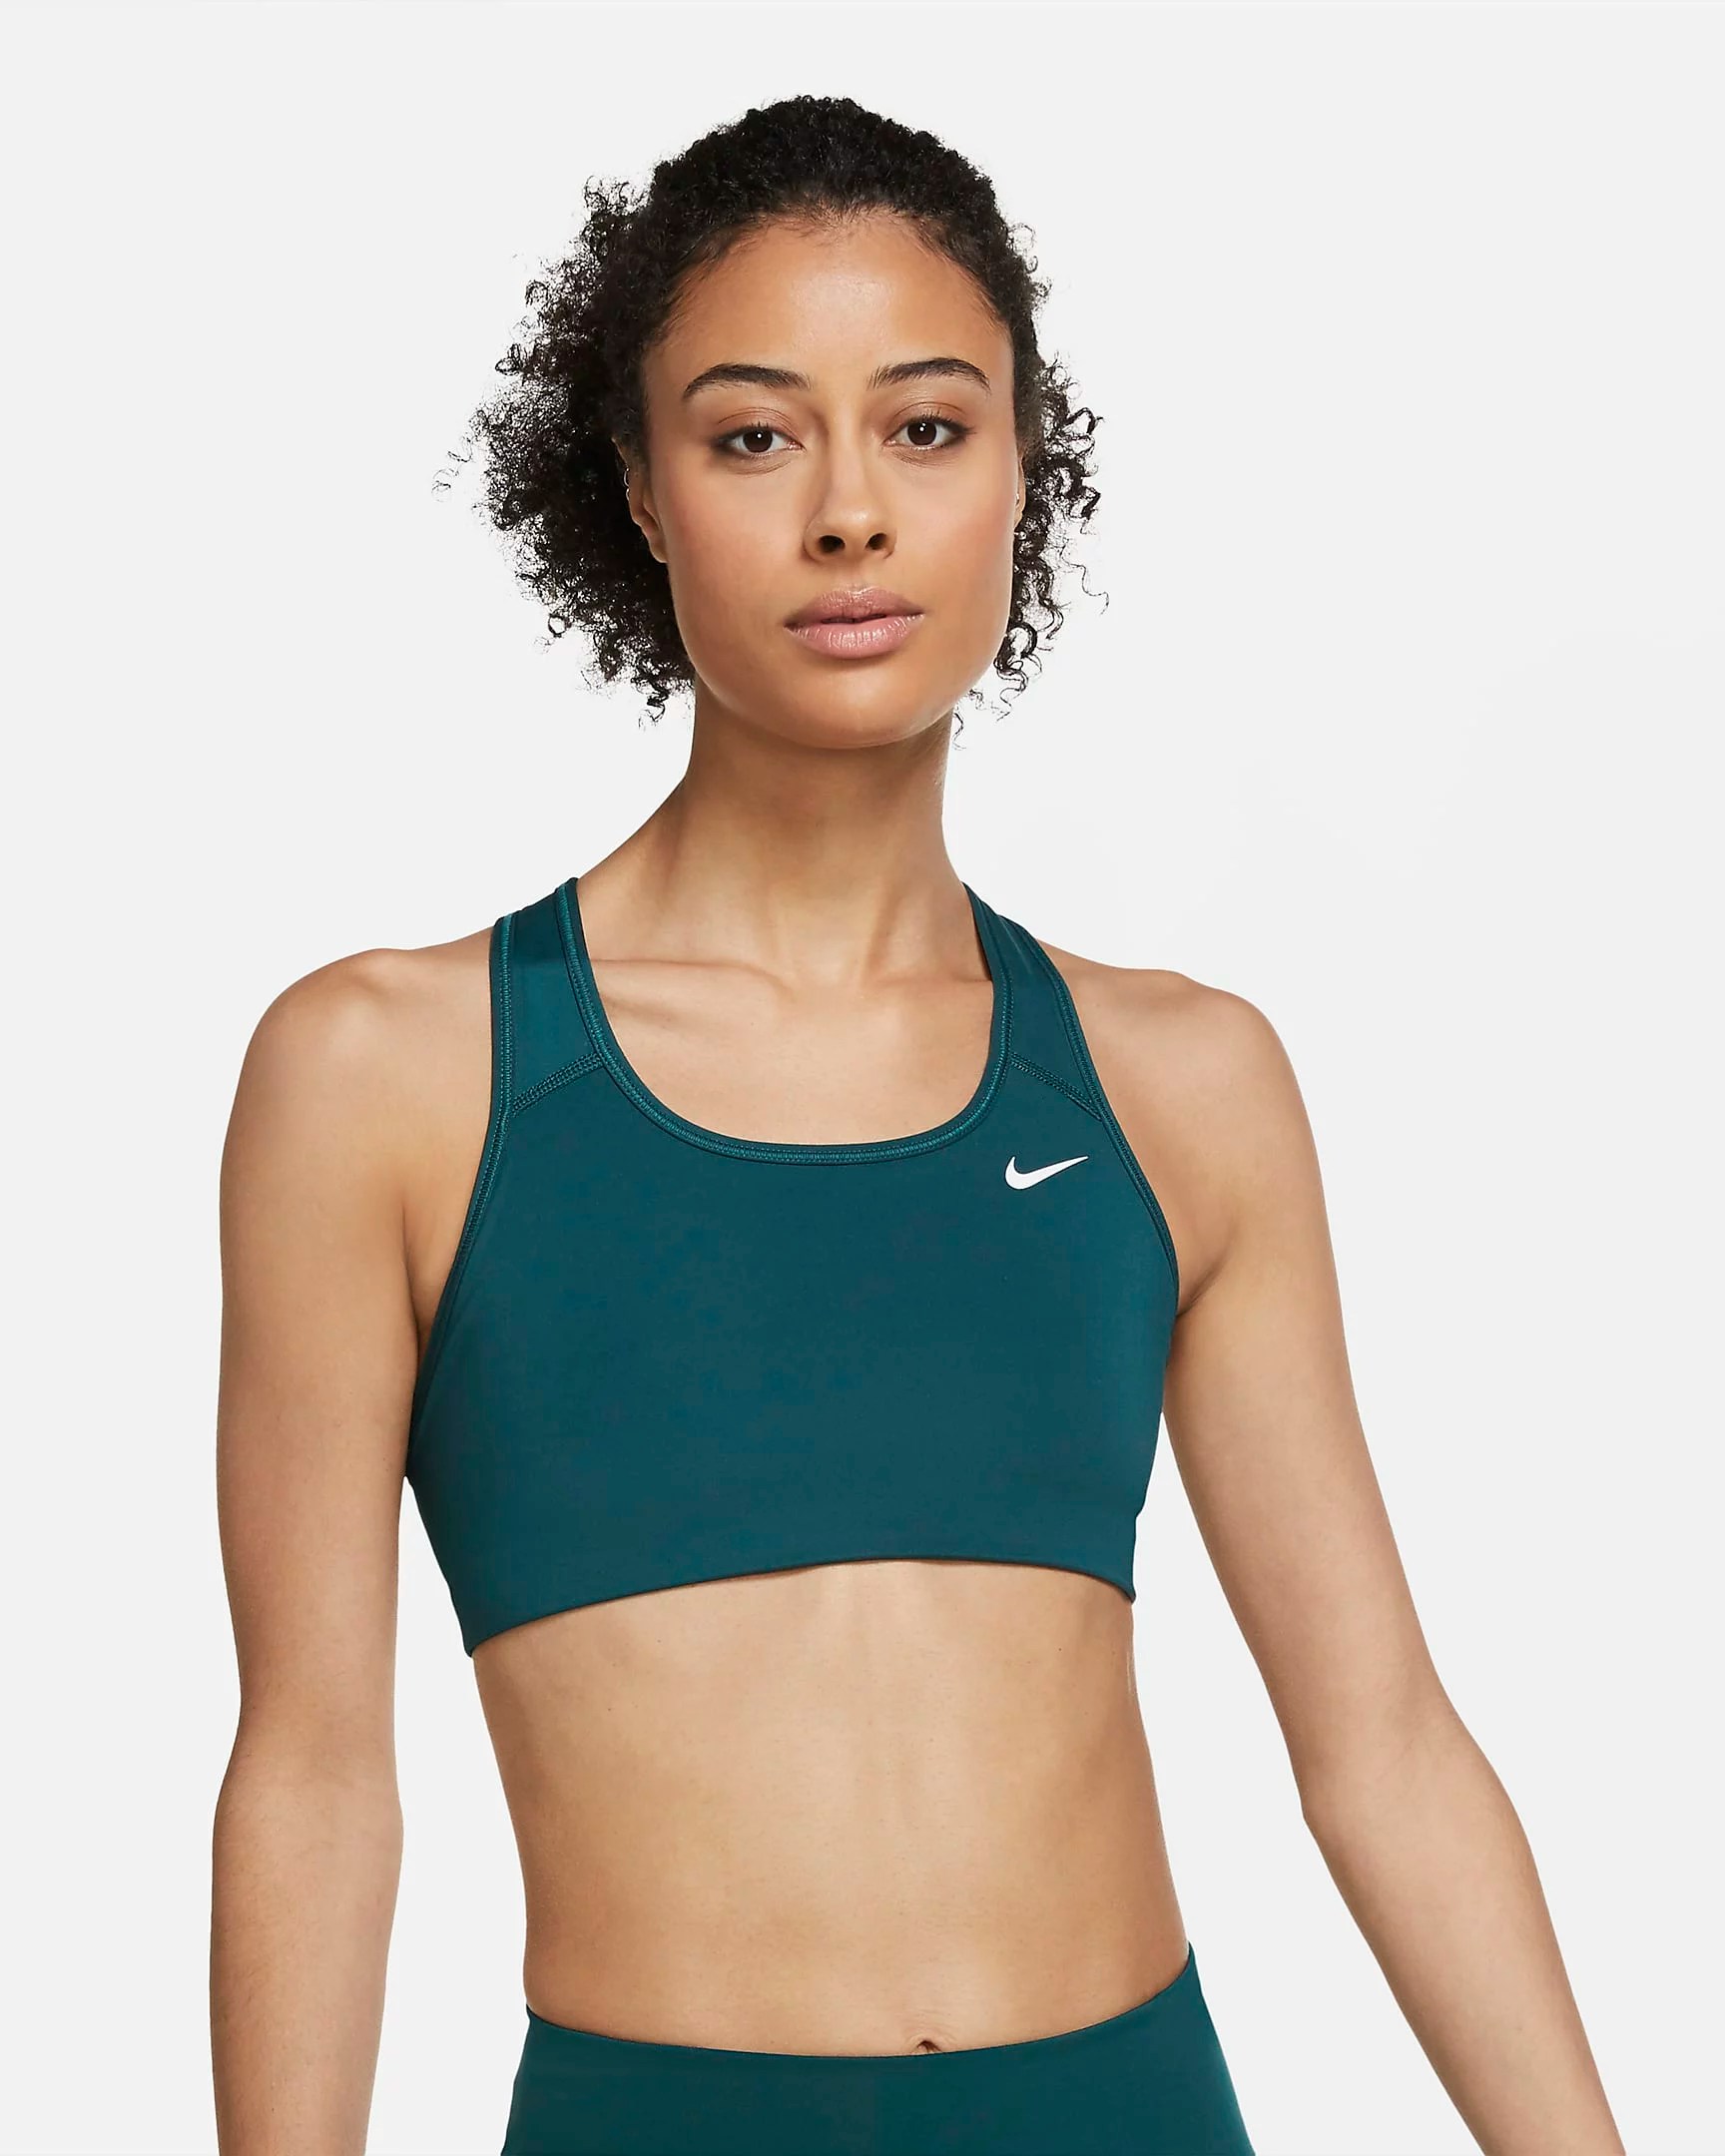 10 Things To Buy at the Nike Summer Sale 2021 | Well+Good